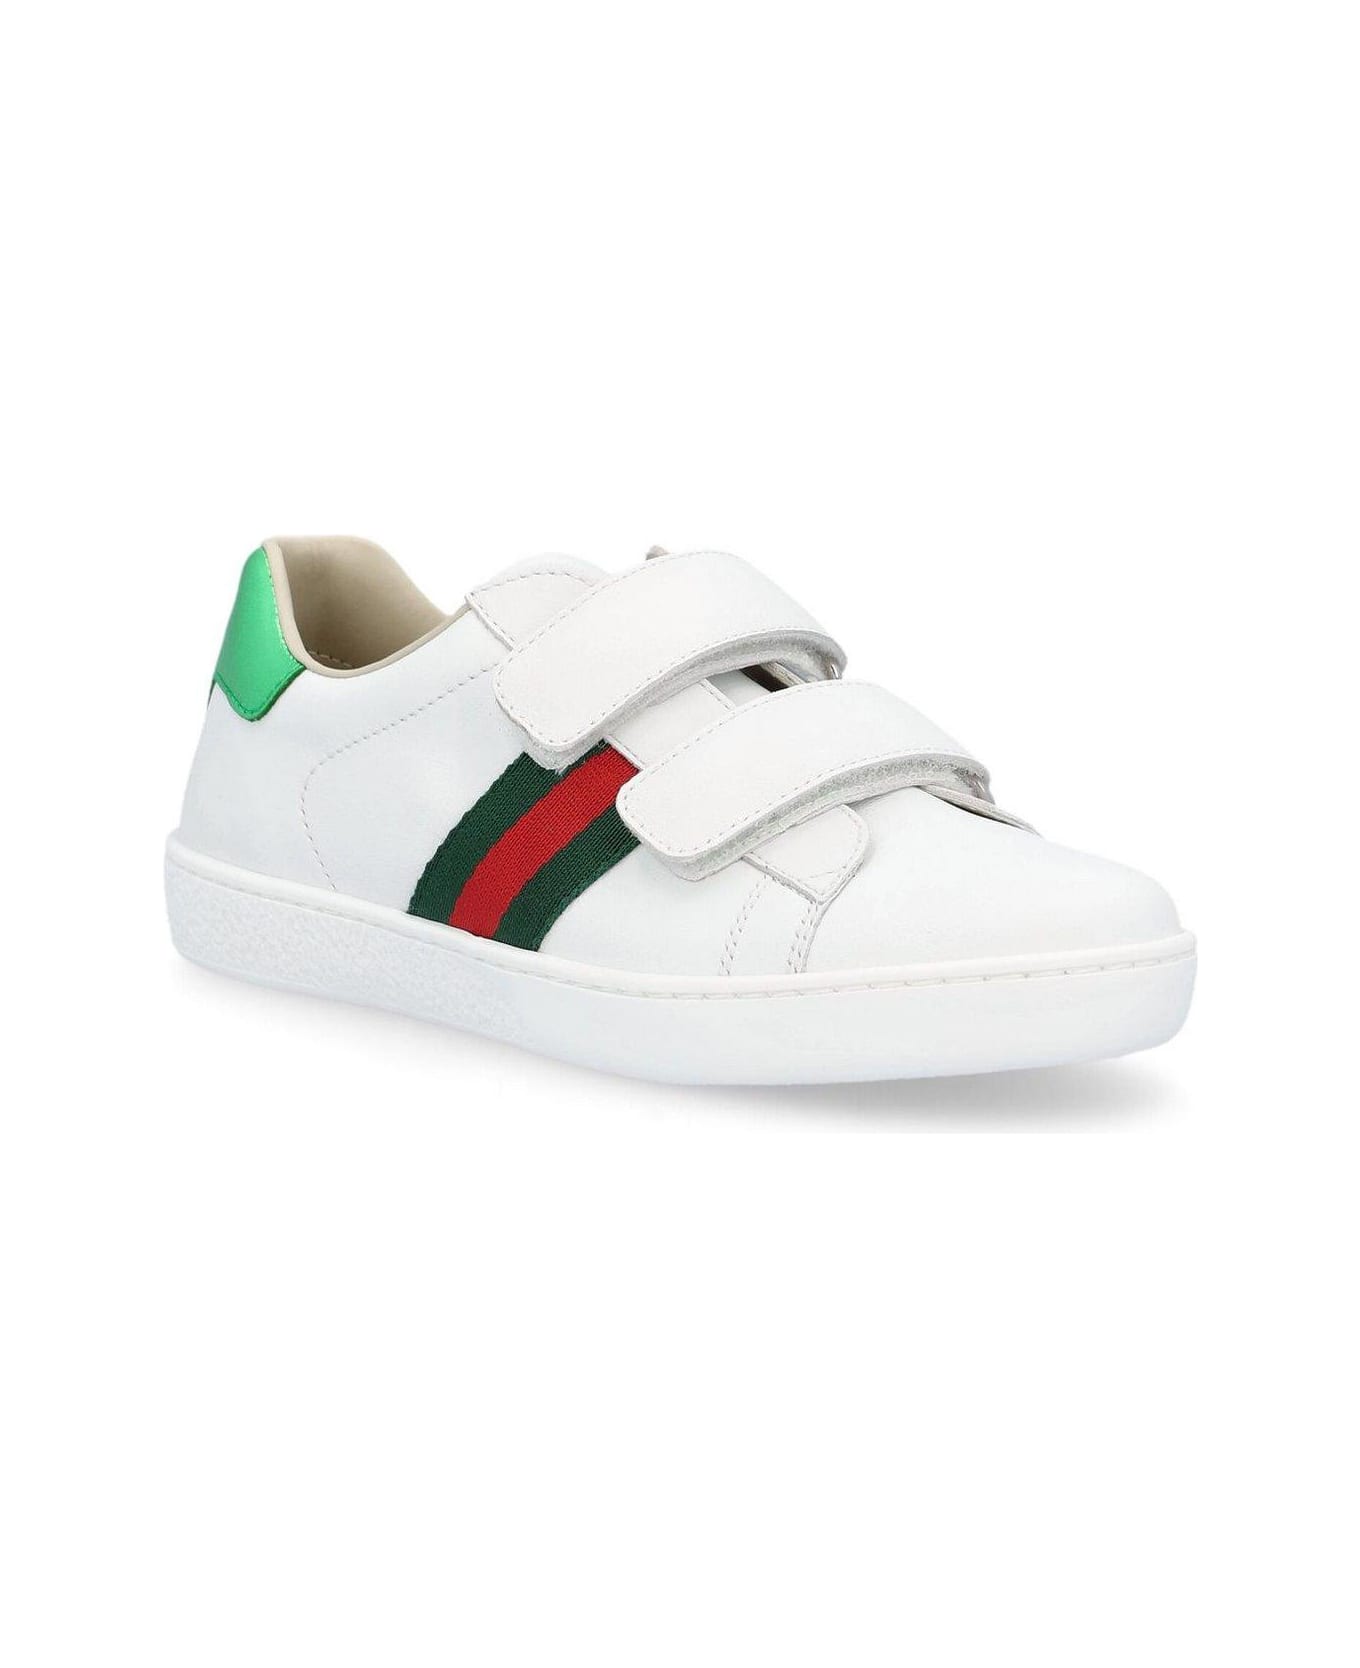 Gucci Ace Round Toe Sneakers シューズ